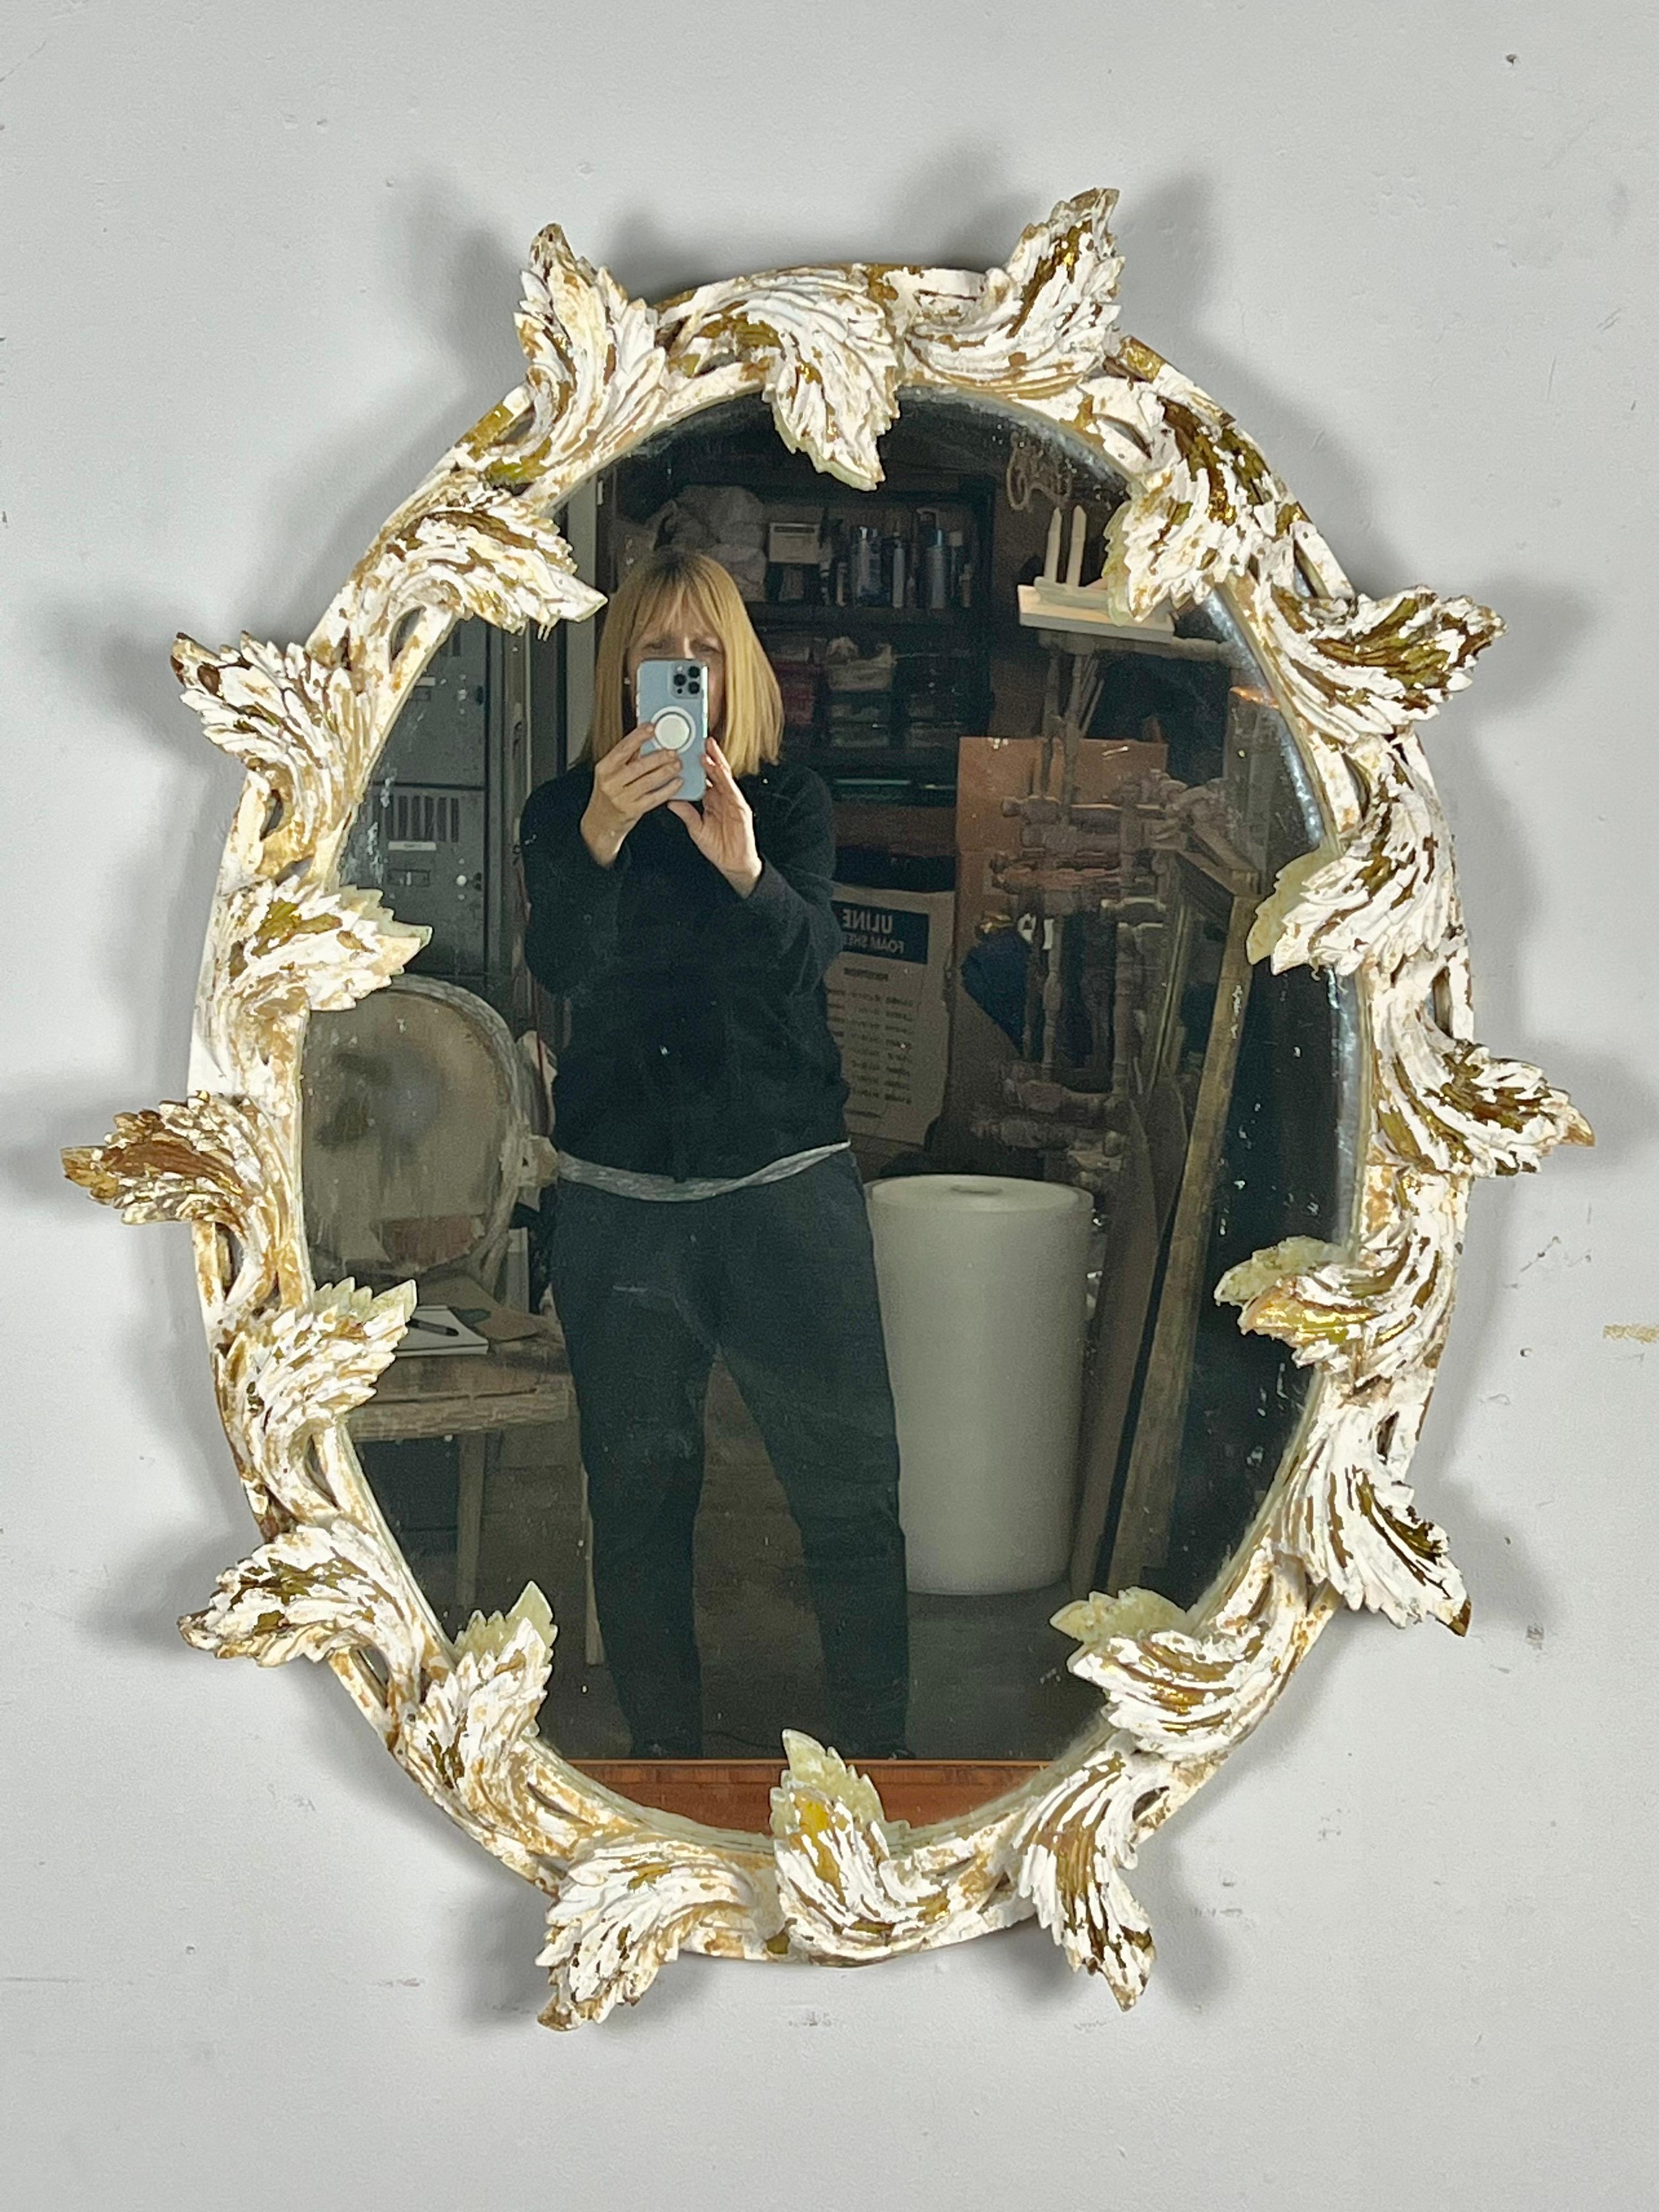 Italian carved oval shaped mirror depicting carved leaves throughout. The mirror was originally gilt wood but has lost most of it's gold over the years exposing the gesso underneath.